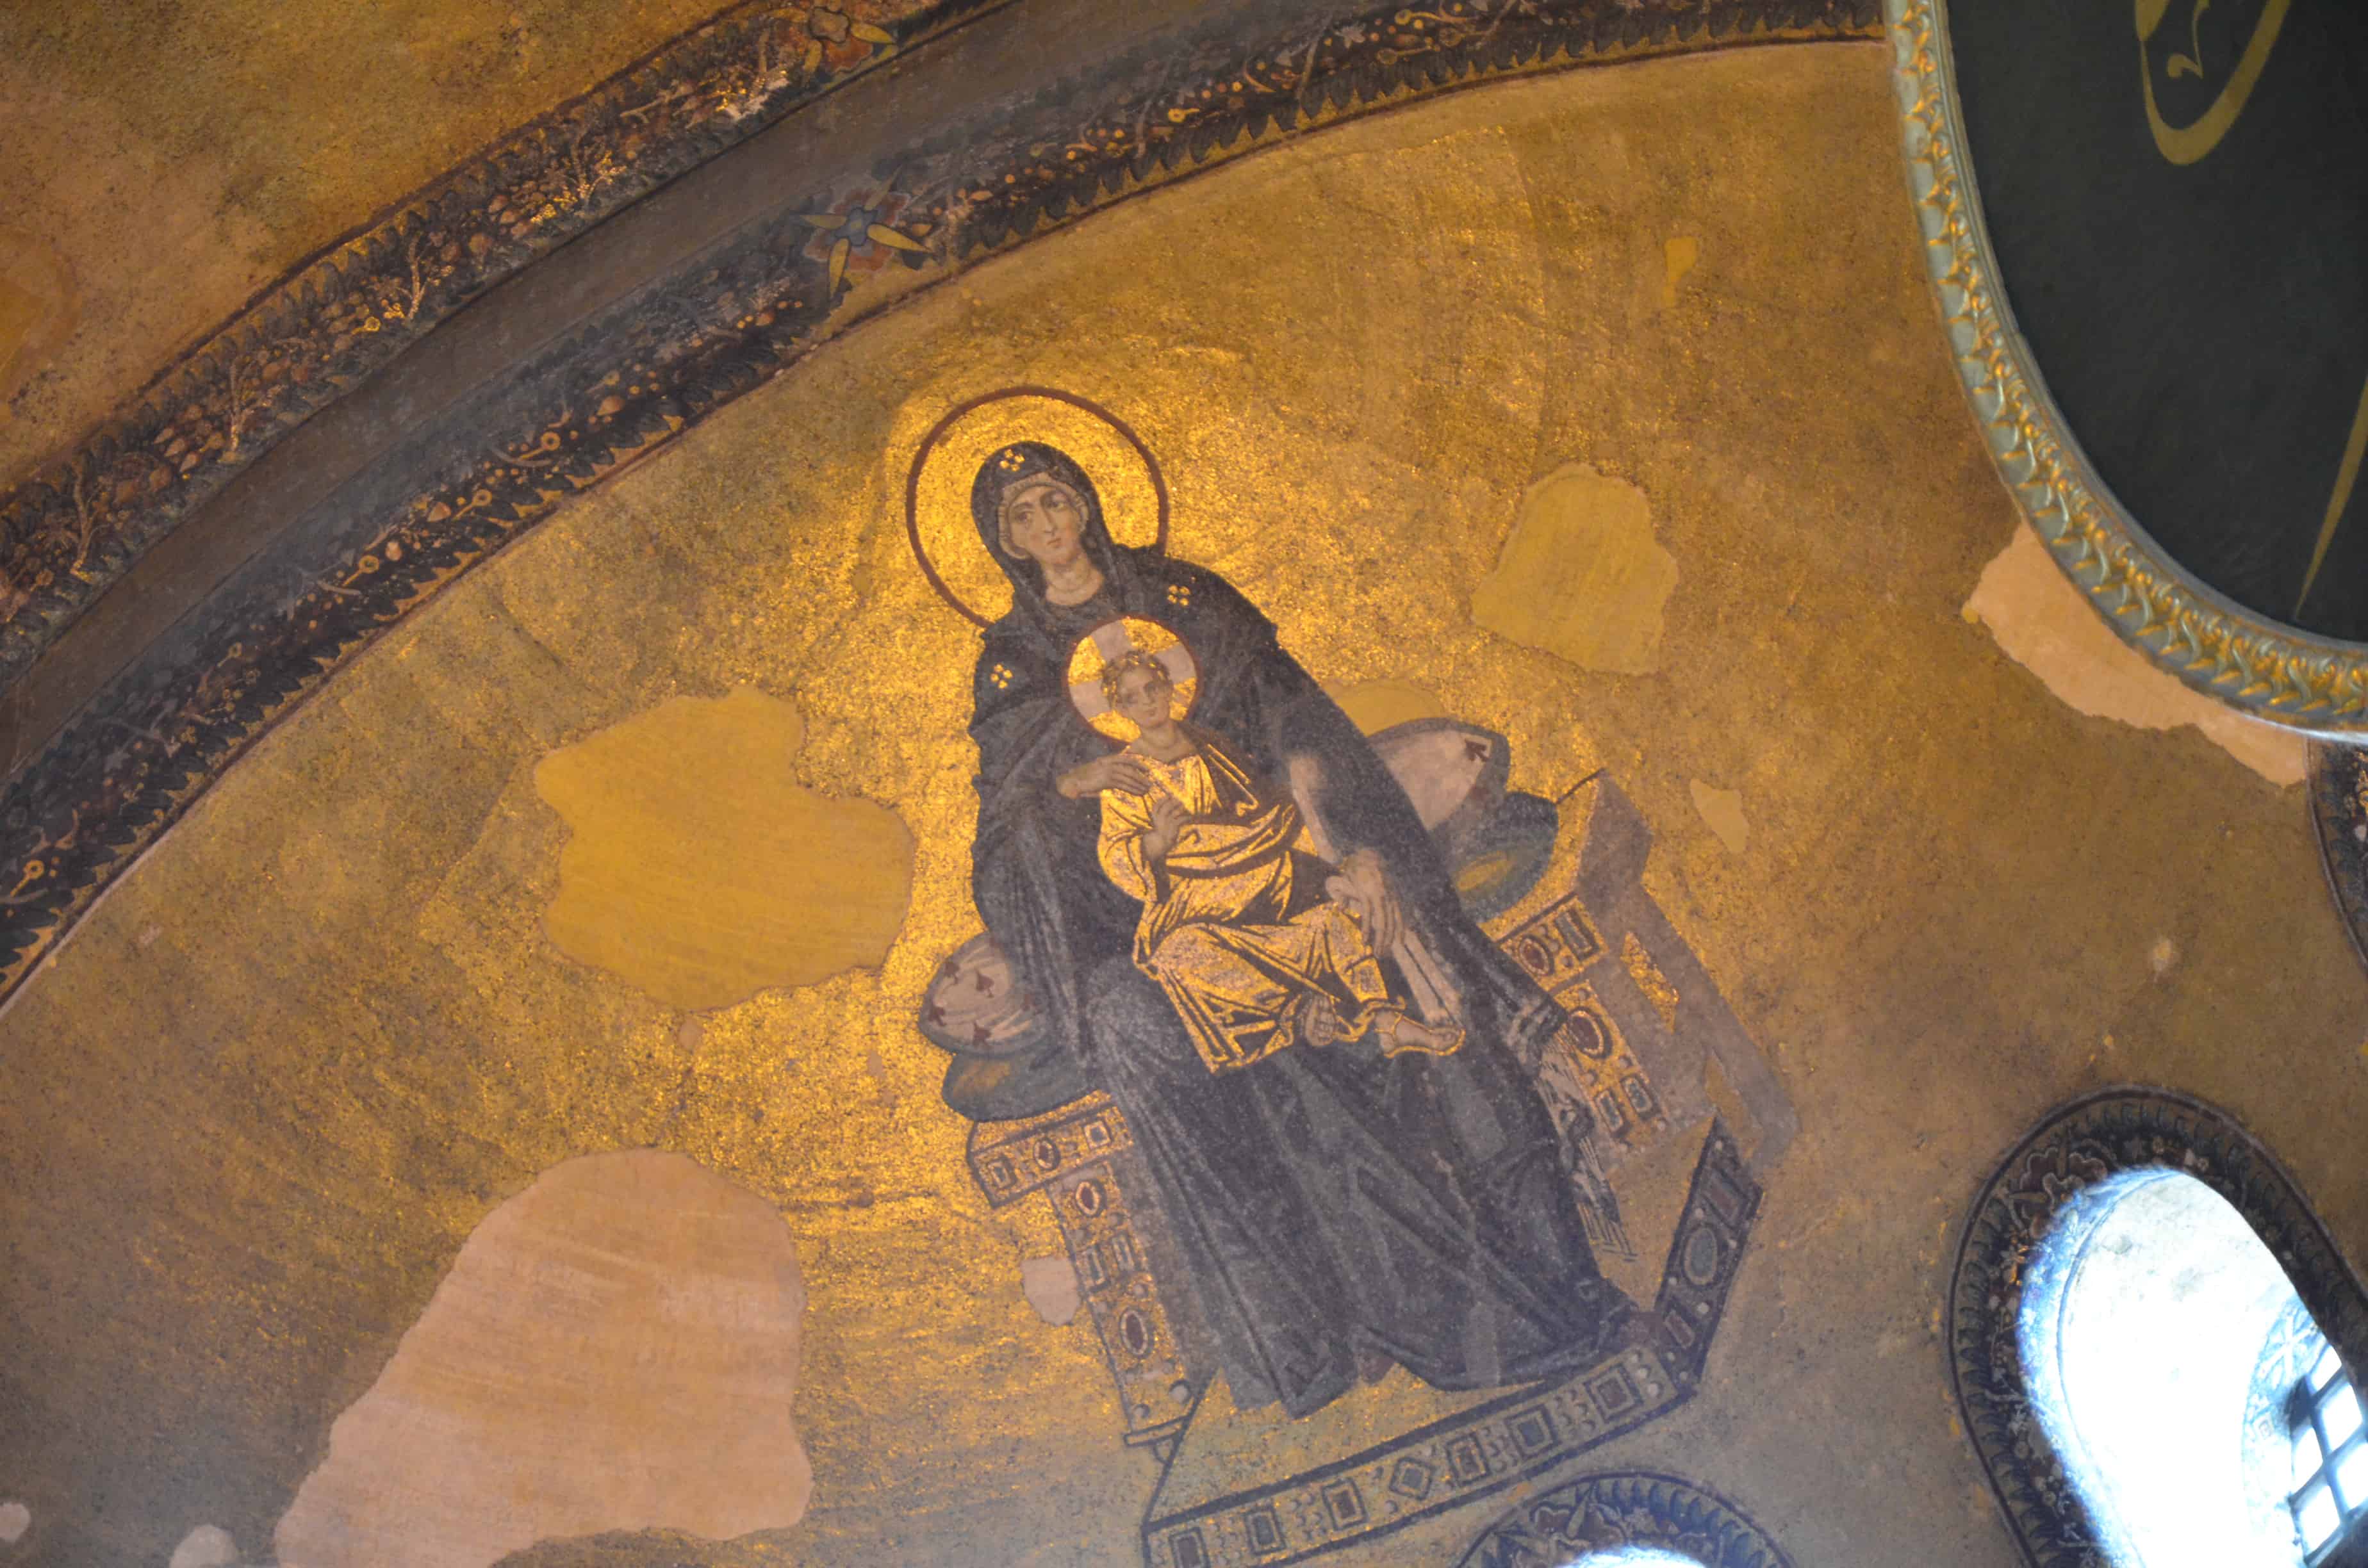 Mosaic of the Virgin and Child in the apse at Hagia Sophia in Istanbul, Turkey